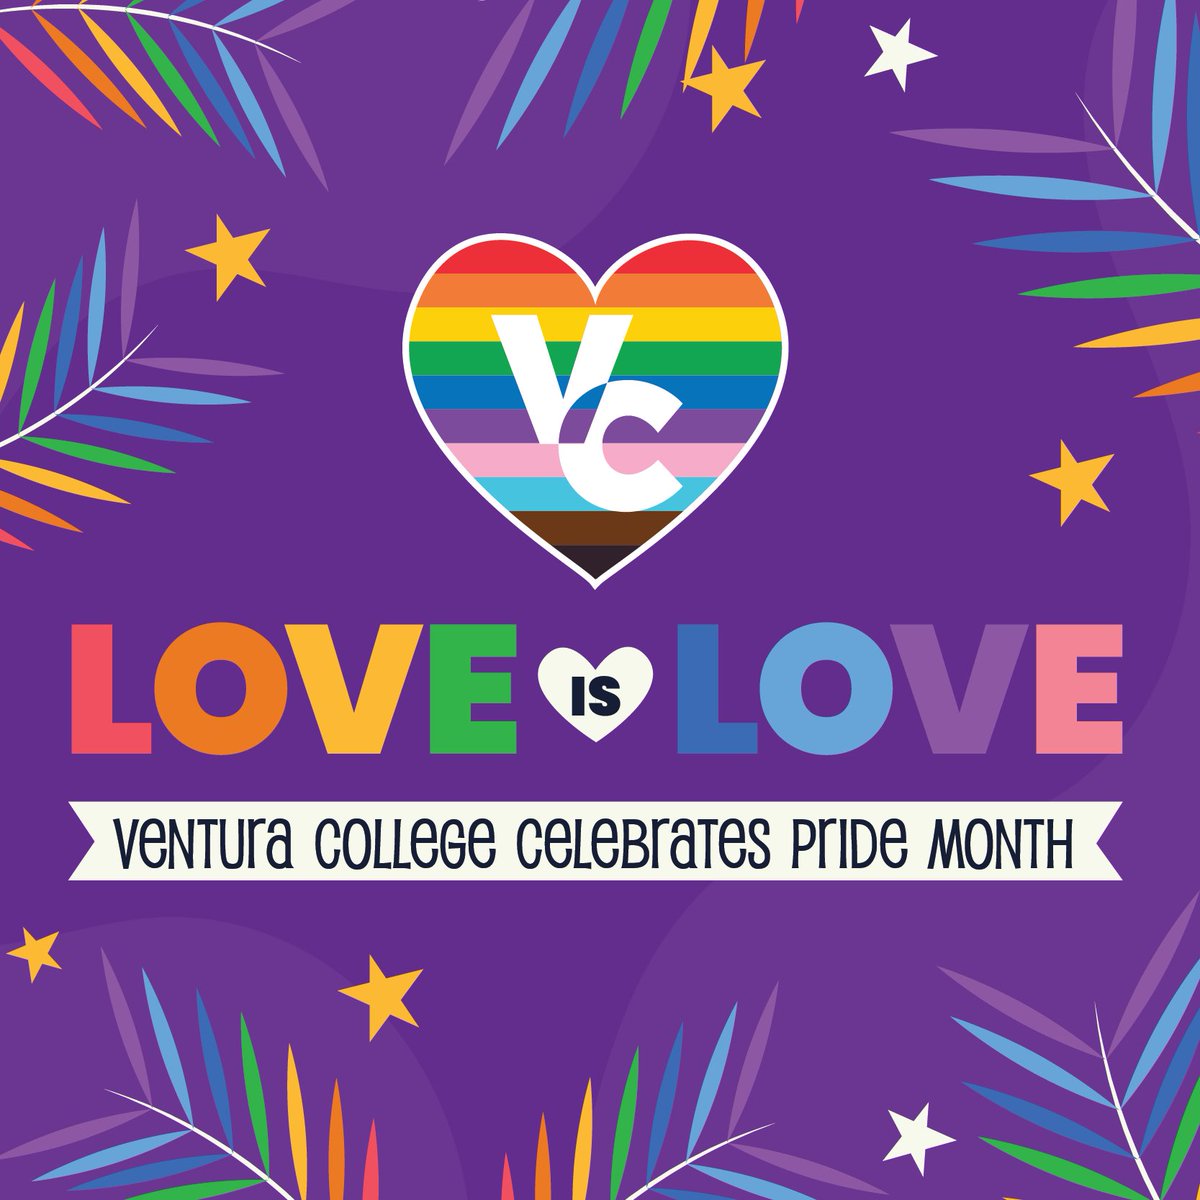 LOVE is LOVE 🏳️‍🌈🏳️‍⚧️

#VenturaCollege celebrates #PrideMonth

“When all Americans are treated as equal, no matter who they are or whom they love, we are all more free.” - President Barack Obama